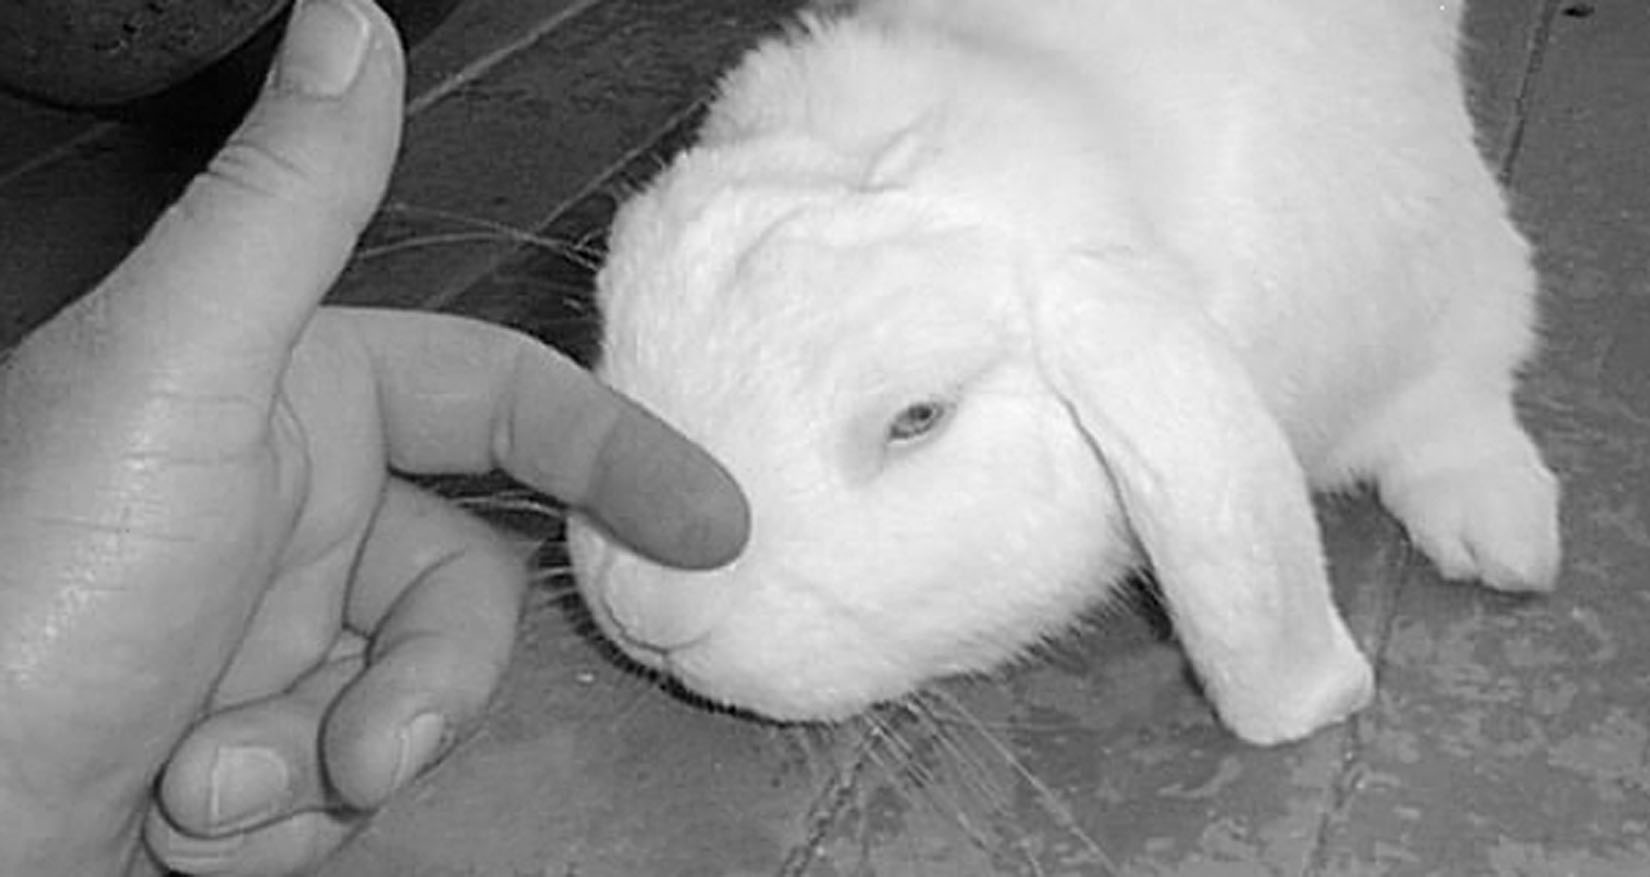 a blissful looking bunny being stroked on the nose